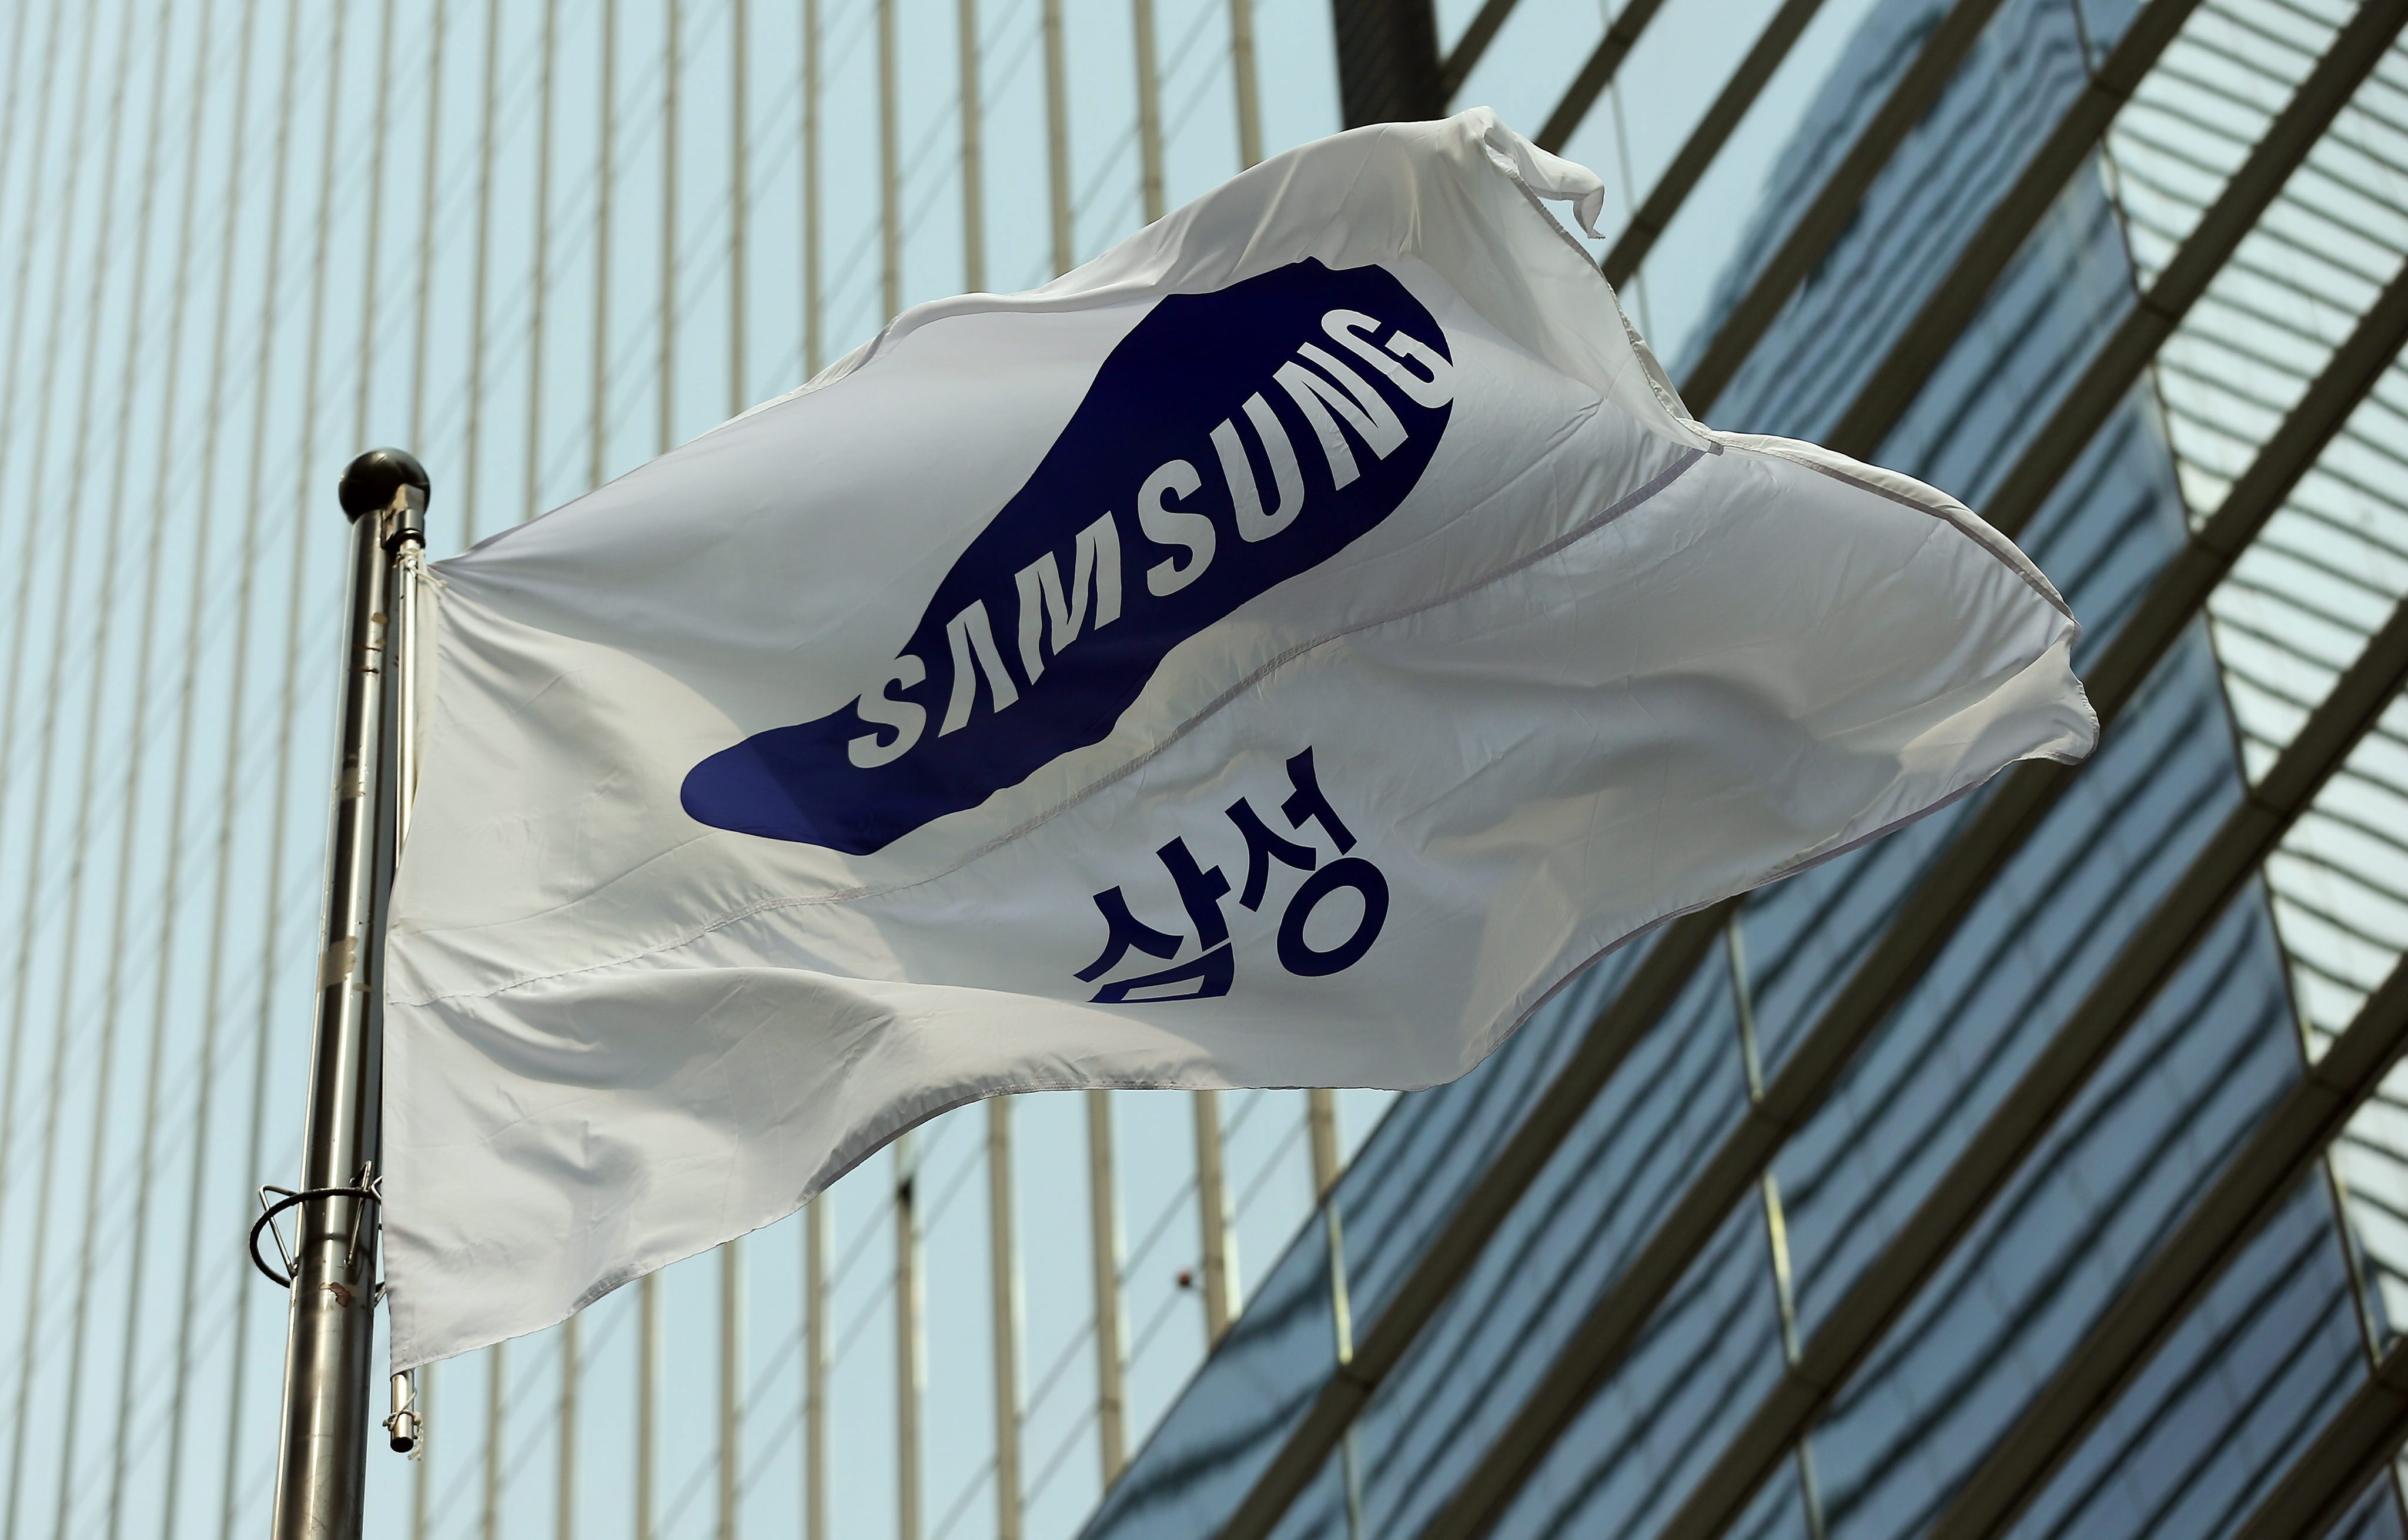 Samsung expects to achieve profits of more than 1400% on an annual basis